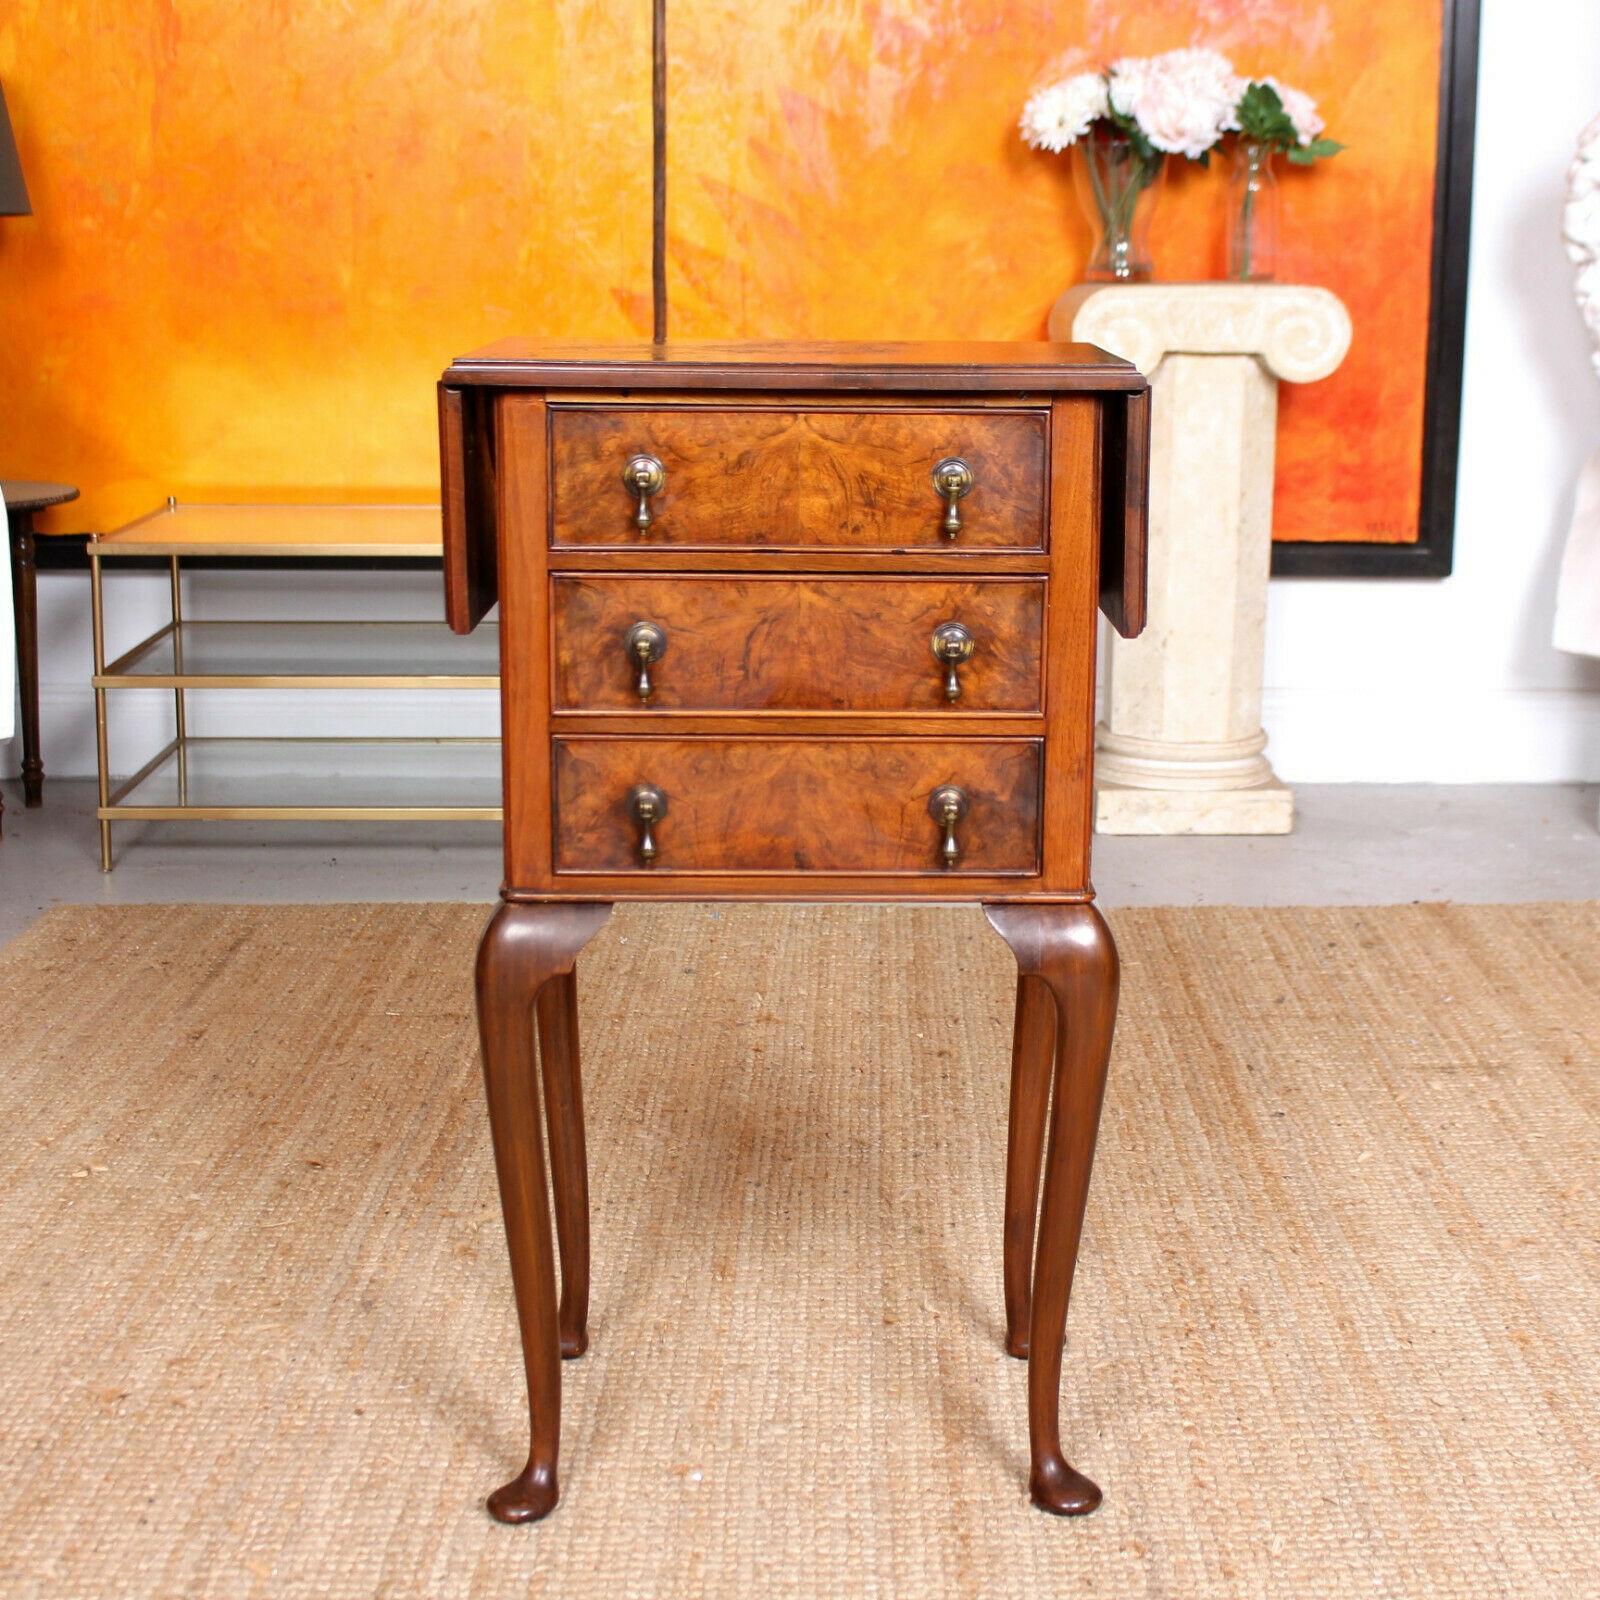 The walnut marquetry work boasting a well figured burl grain.
The top with chamfered egdes extending by way of drop leafs. Fitted three graduated drawers with dovetailed jointing, solid interiors and mounted with good teardrop handles. Raised on